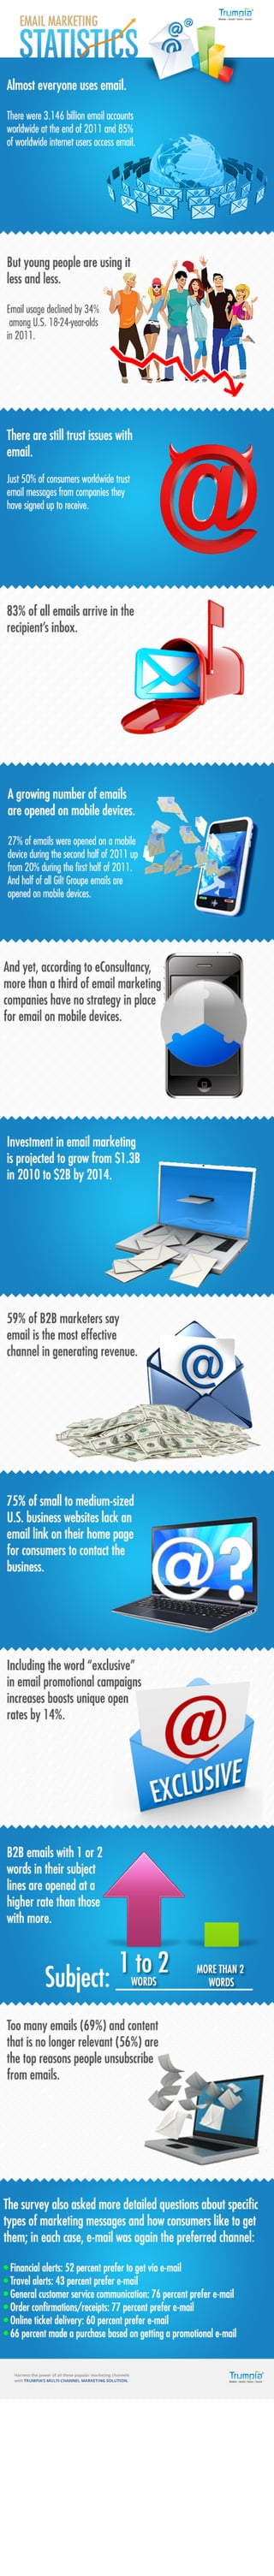 Email Marketing By The Numbers